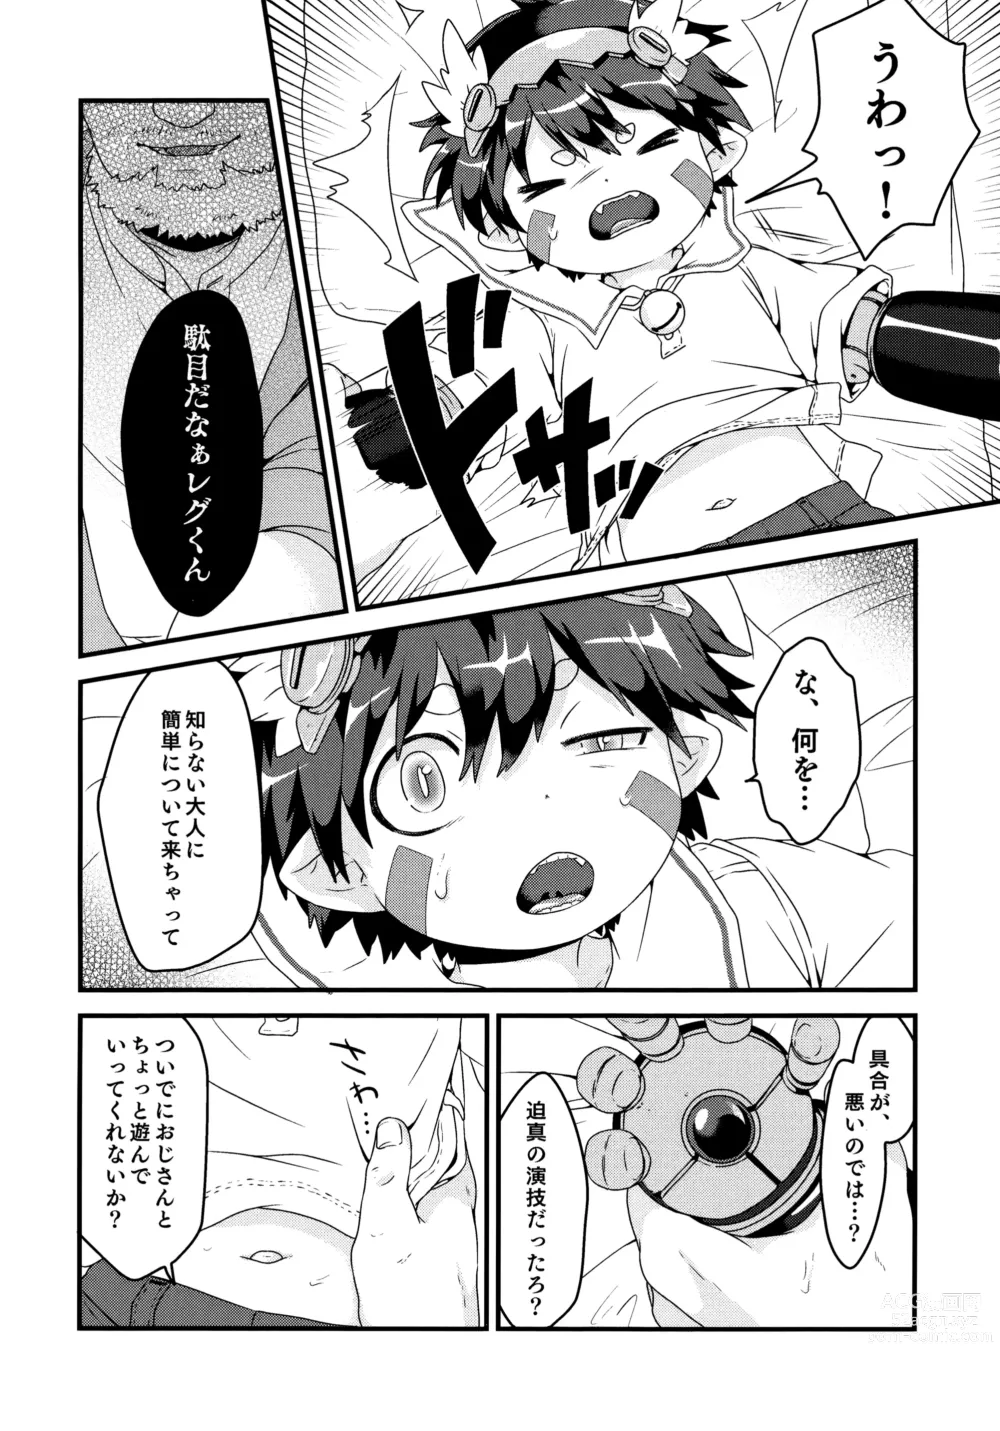 Page 9 of doujinshi Do Aubades Dream of Electric Sheep?